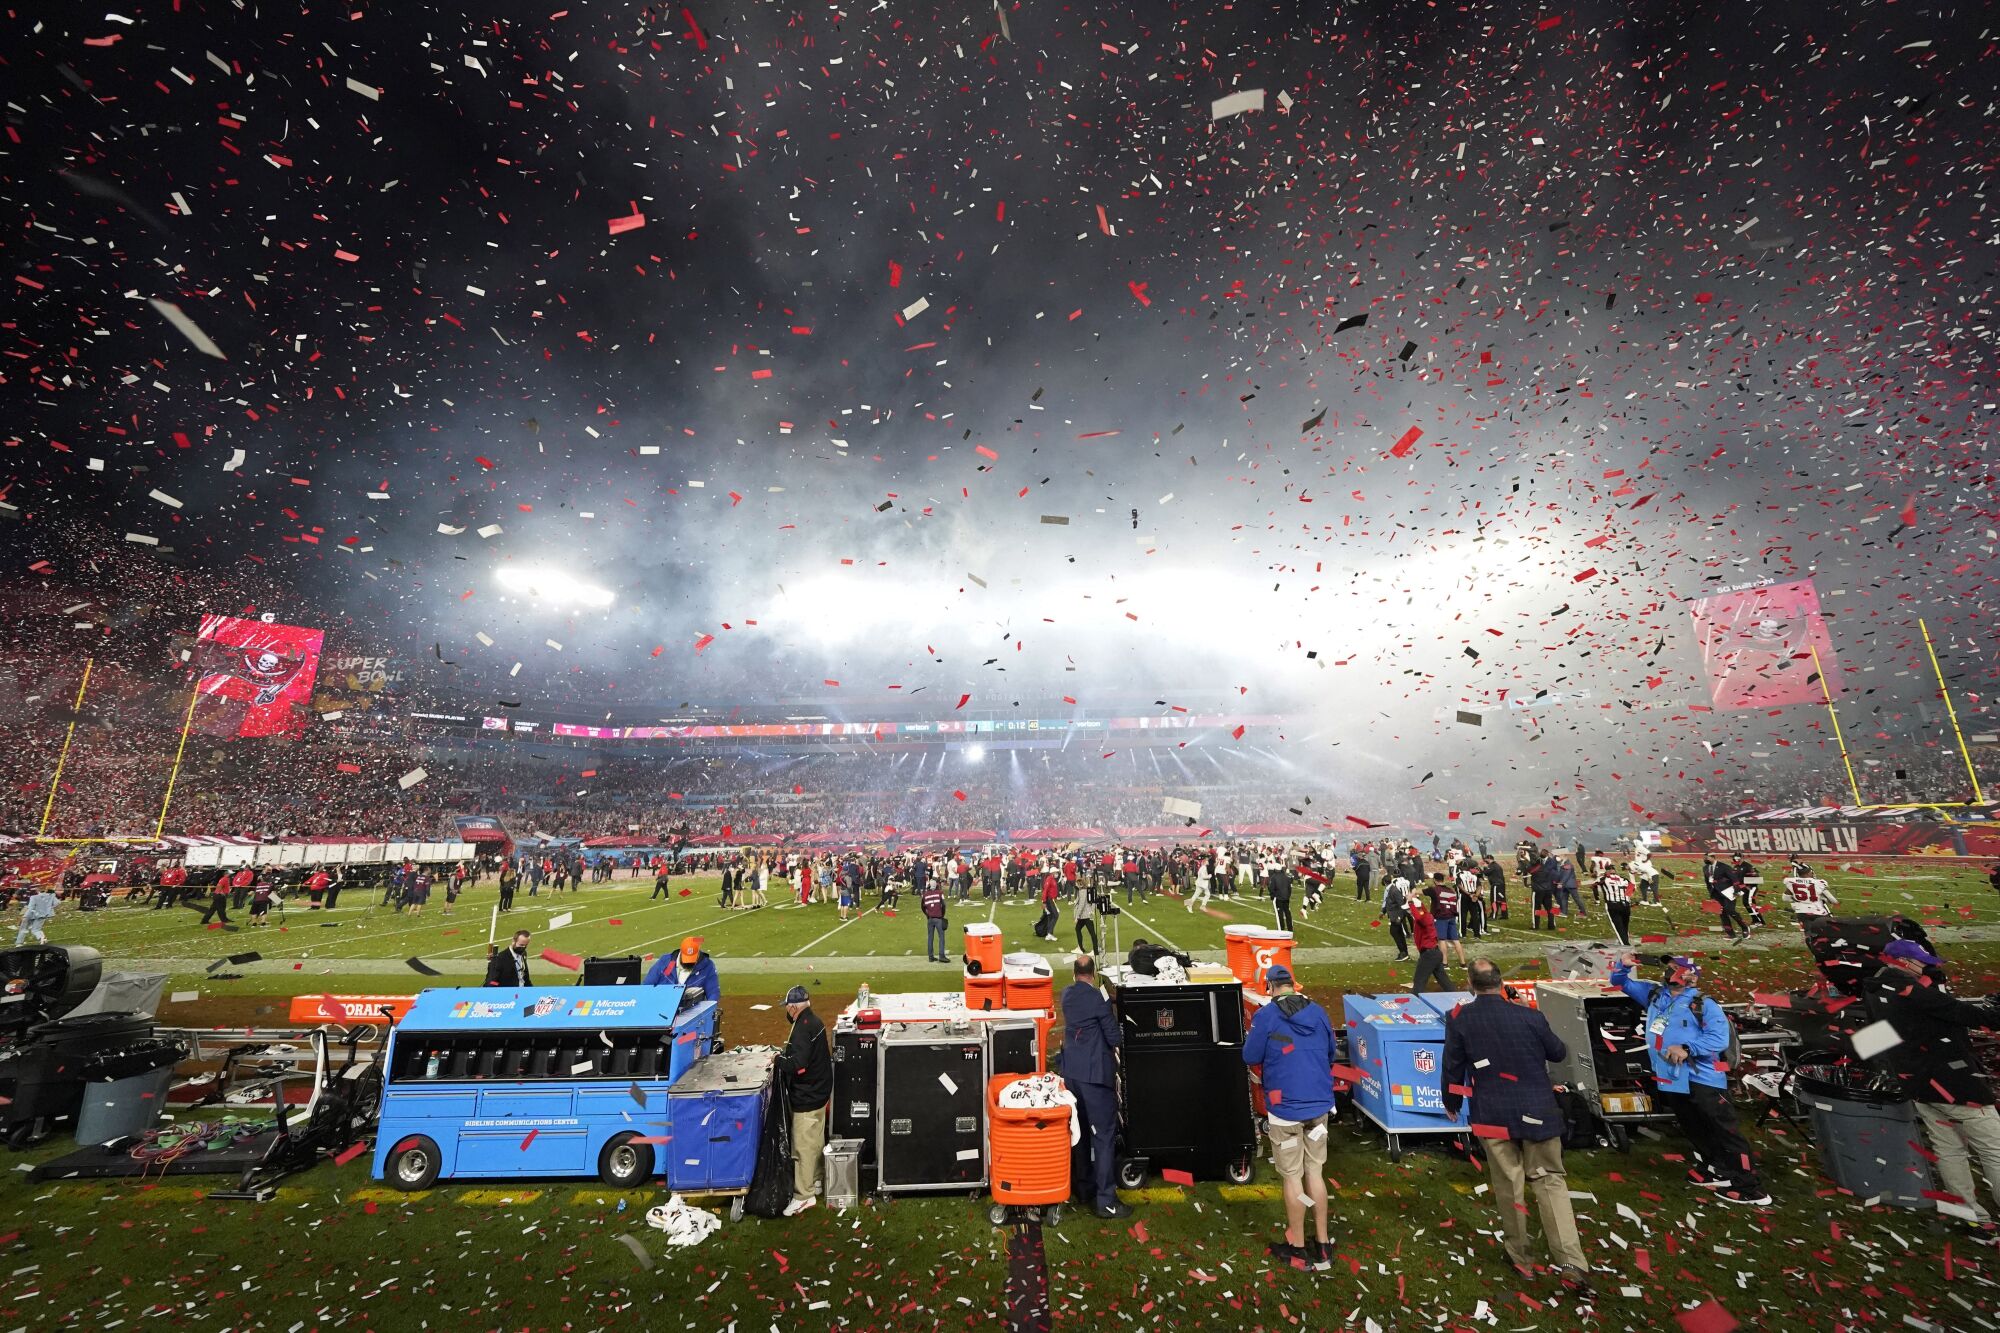 Confetti flies over the field at Raymond James Stadium after Super Bowl LV.